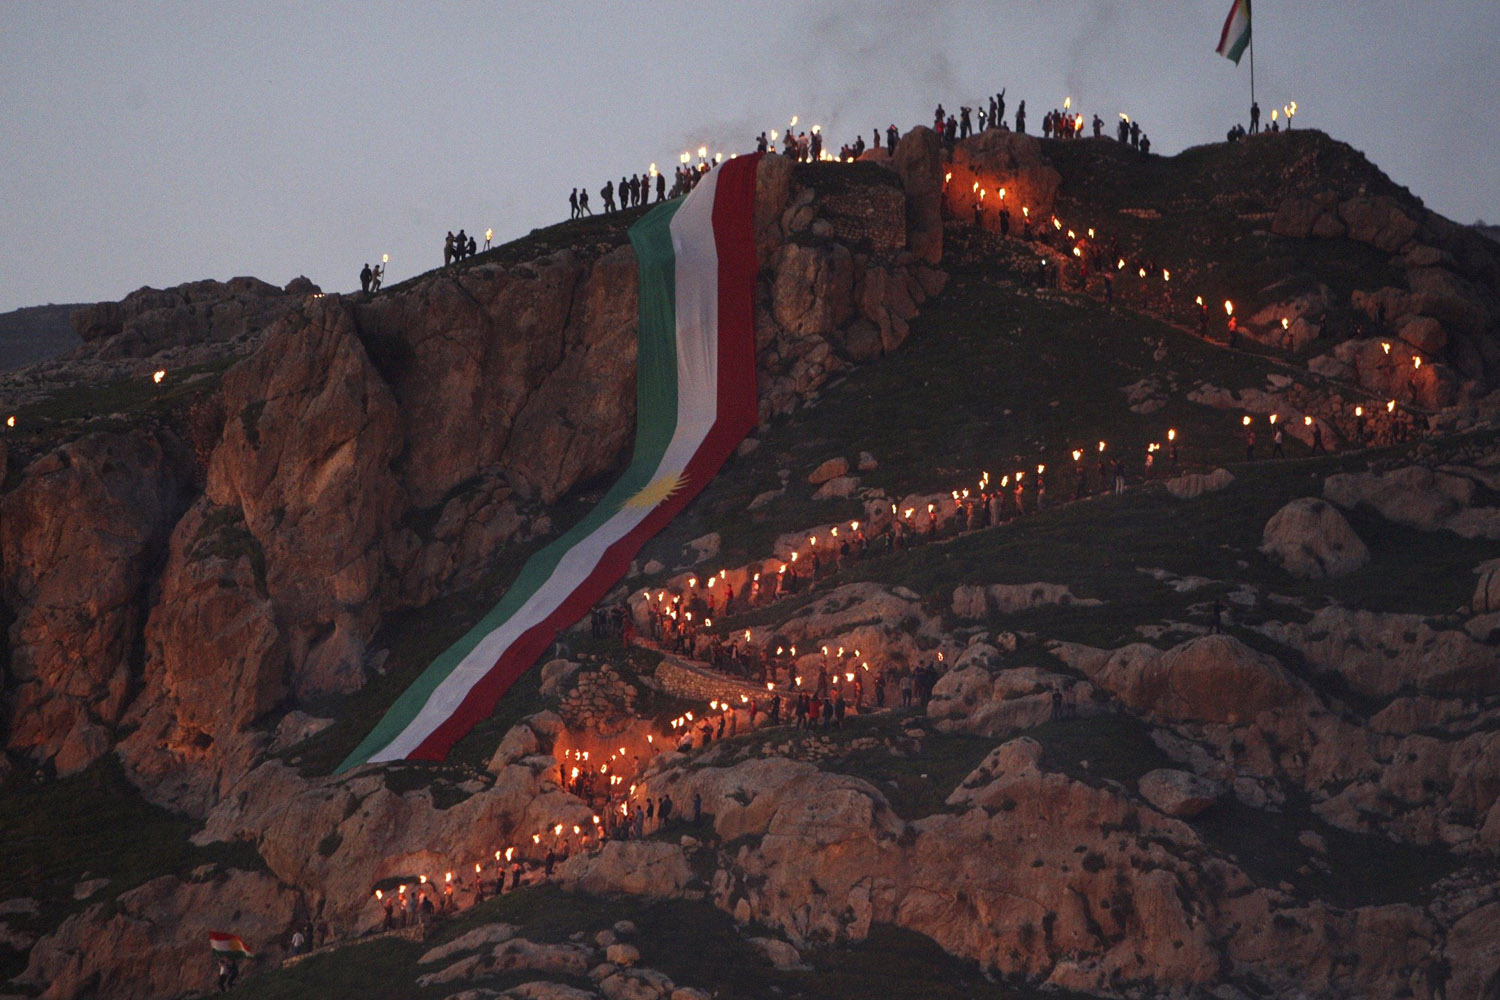 Iraqi Kurdish people carry fire torches up a mountain where a giant flag of Iraq's autonomous Kurdistan region is laid, as they celebrate Newroz Day, a festival marking their spring and new year, near Dahuk